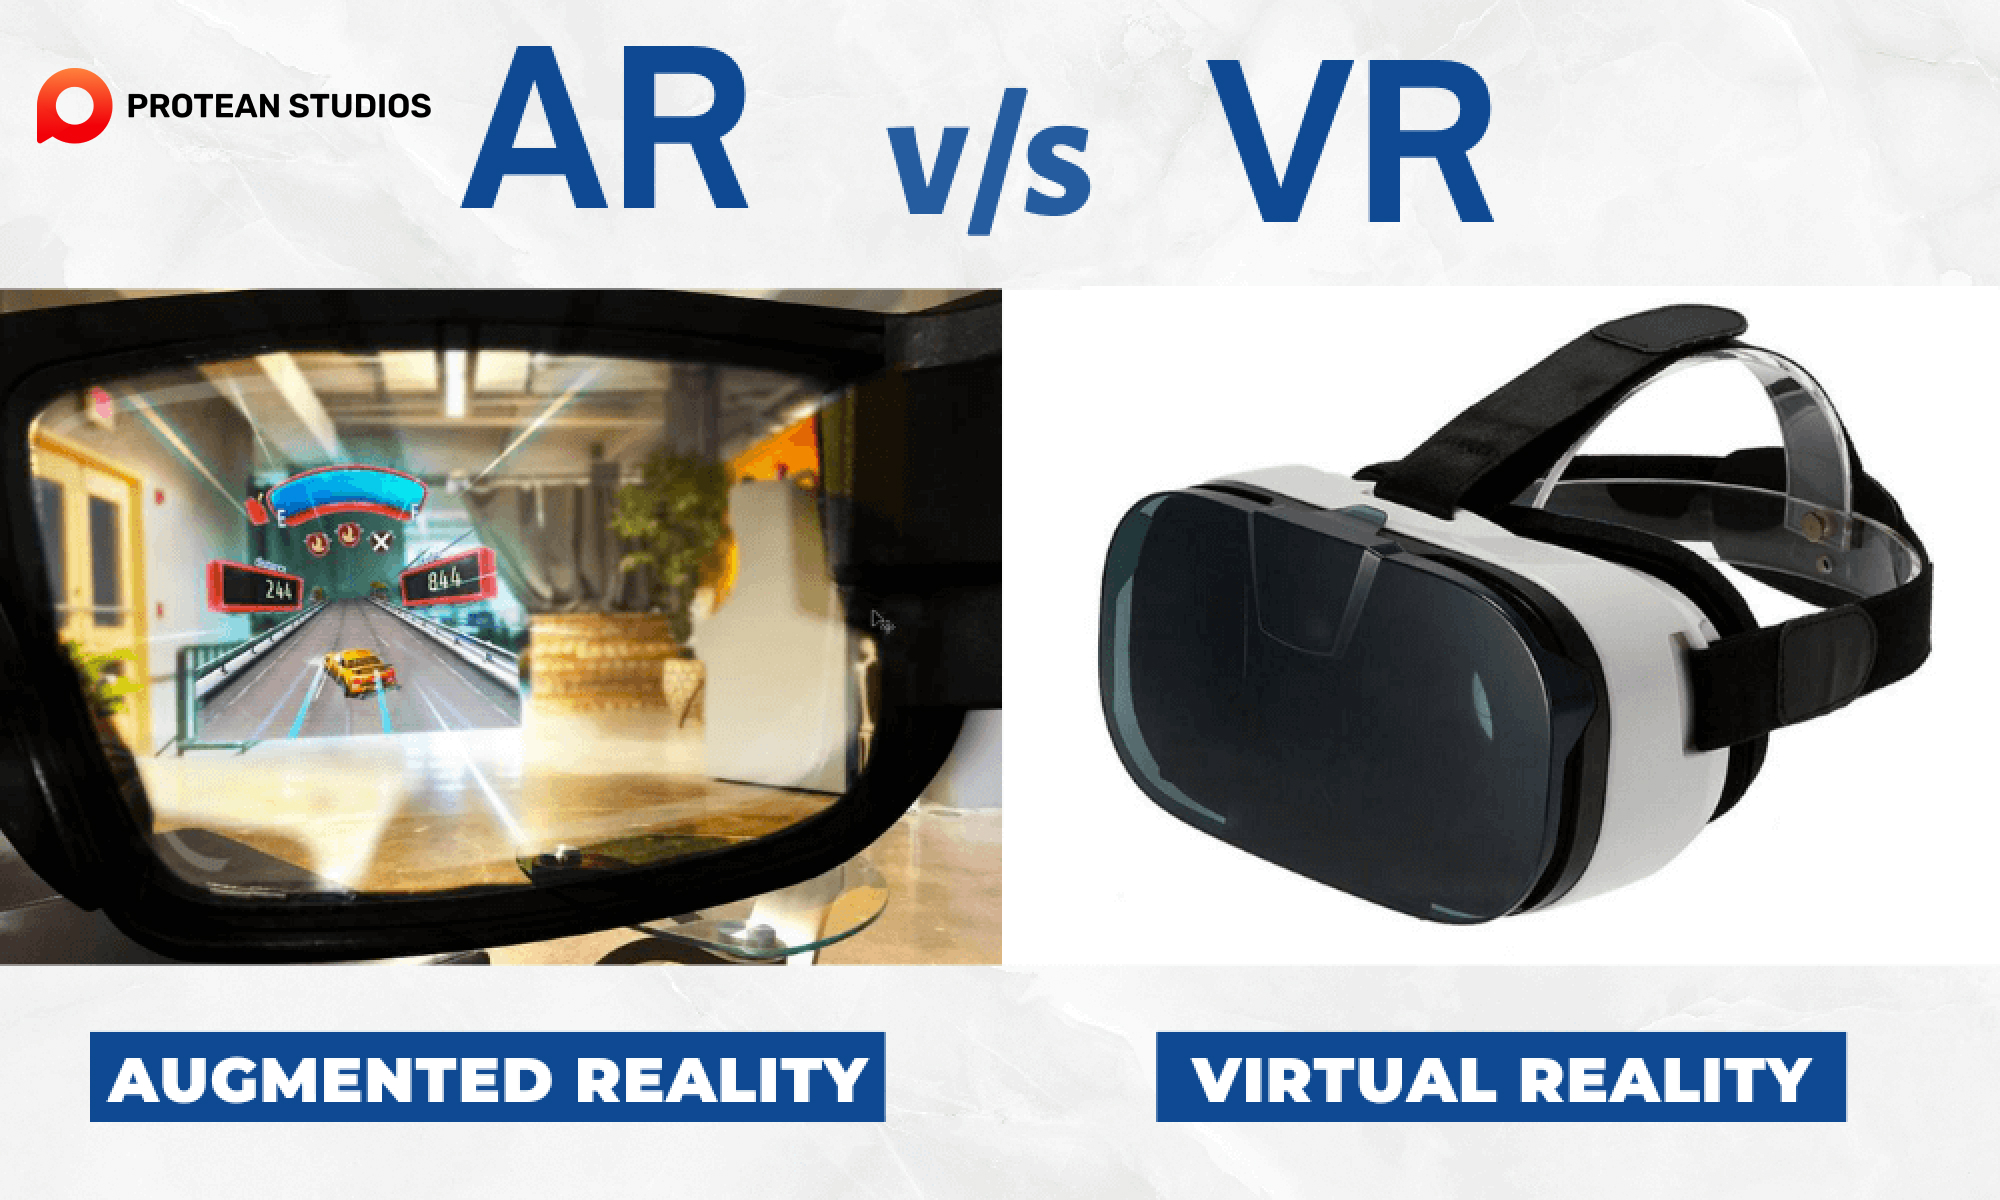 Applications of AR and VR in different fields